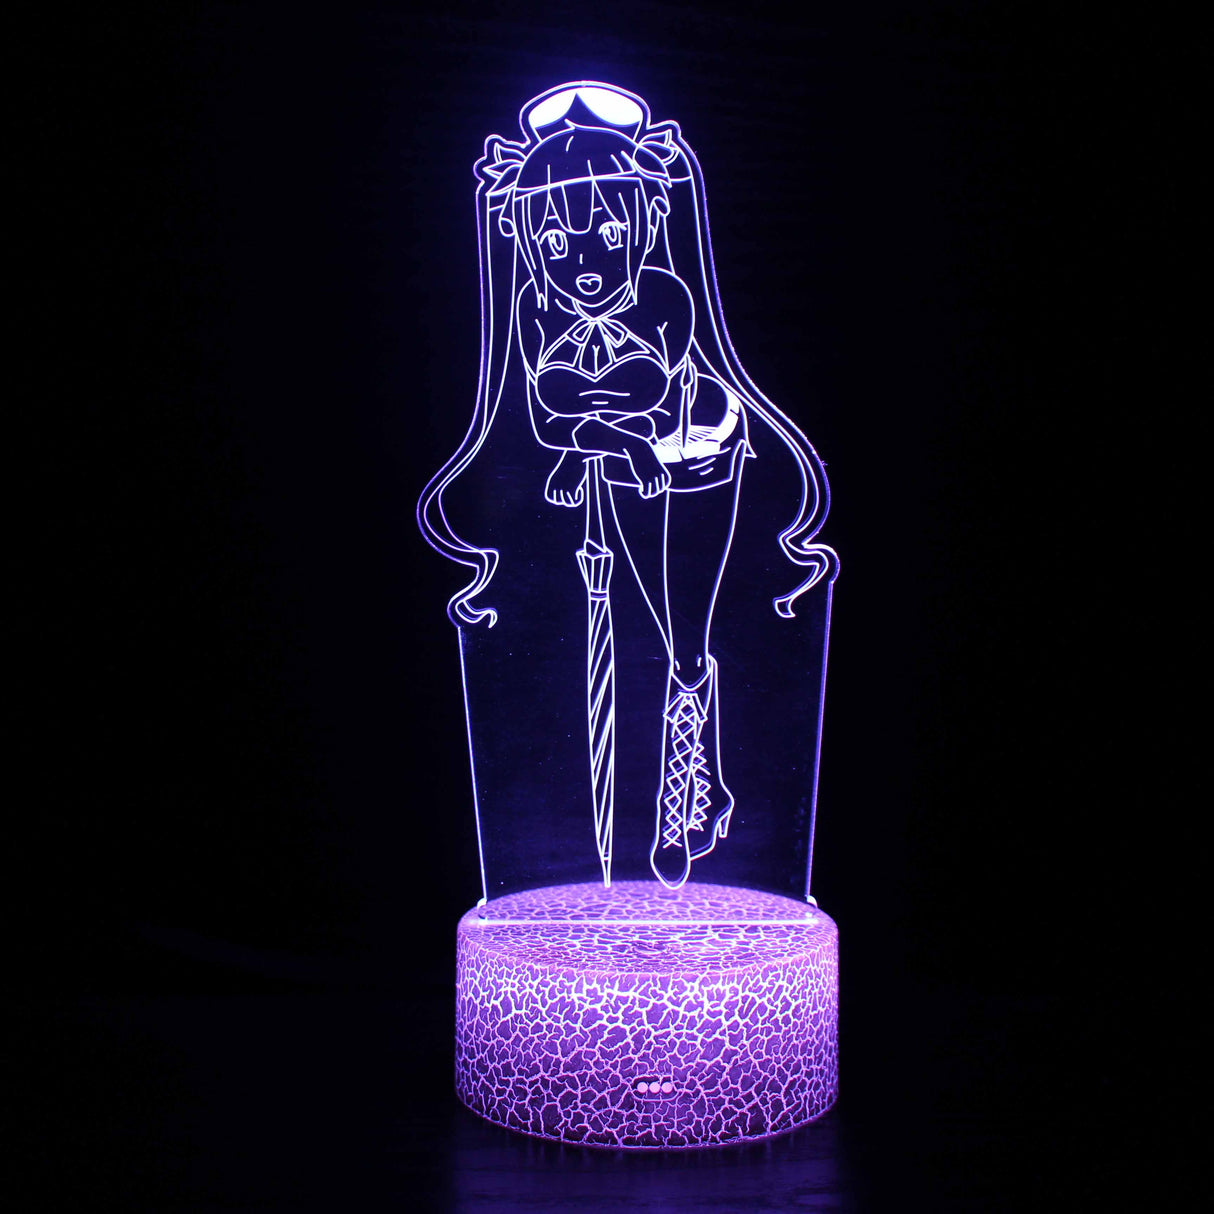 3D Lamp - Female Anime Character With Umbrella